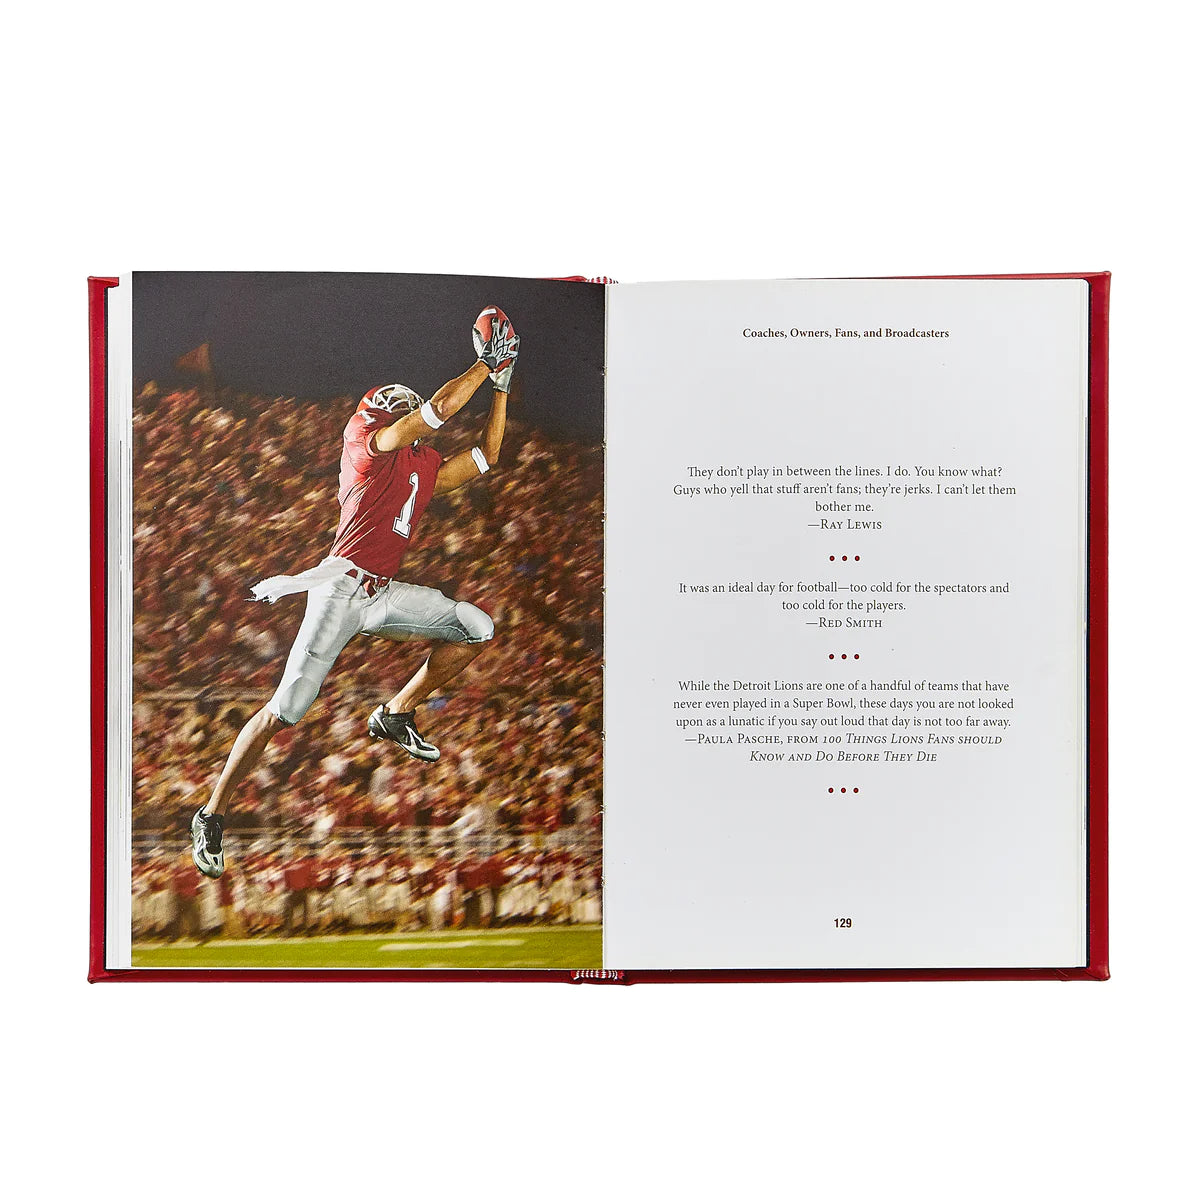 The Little Red Book Of Football Wisdom